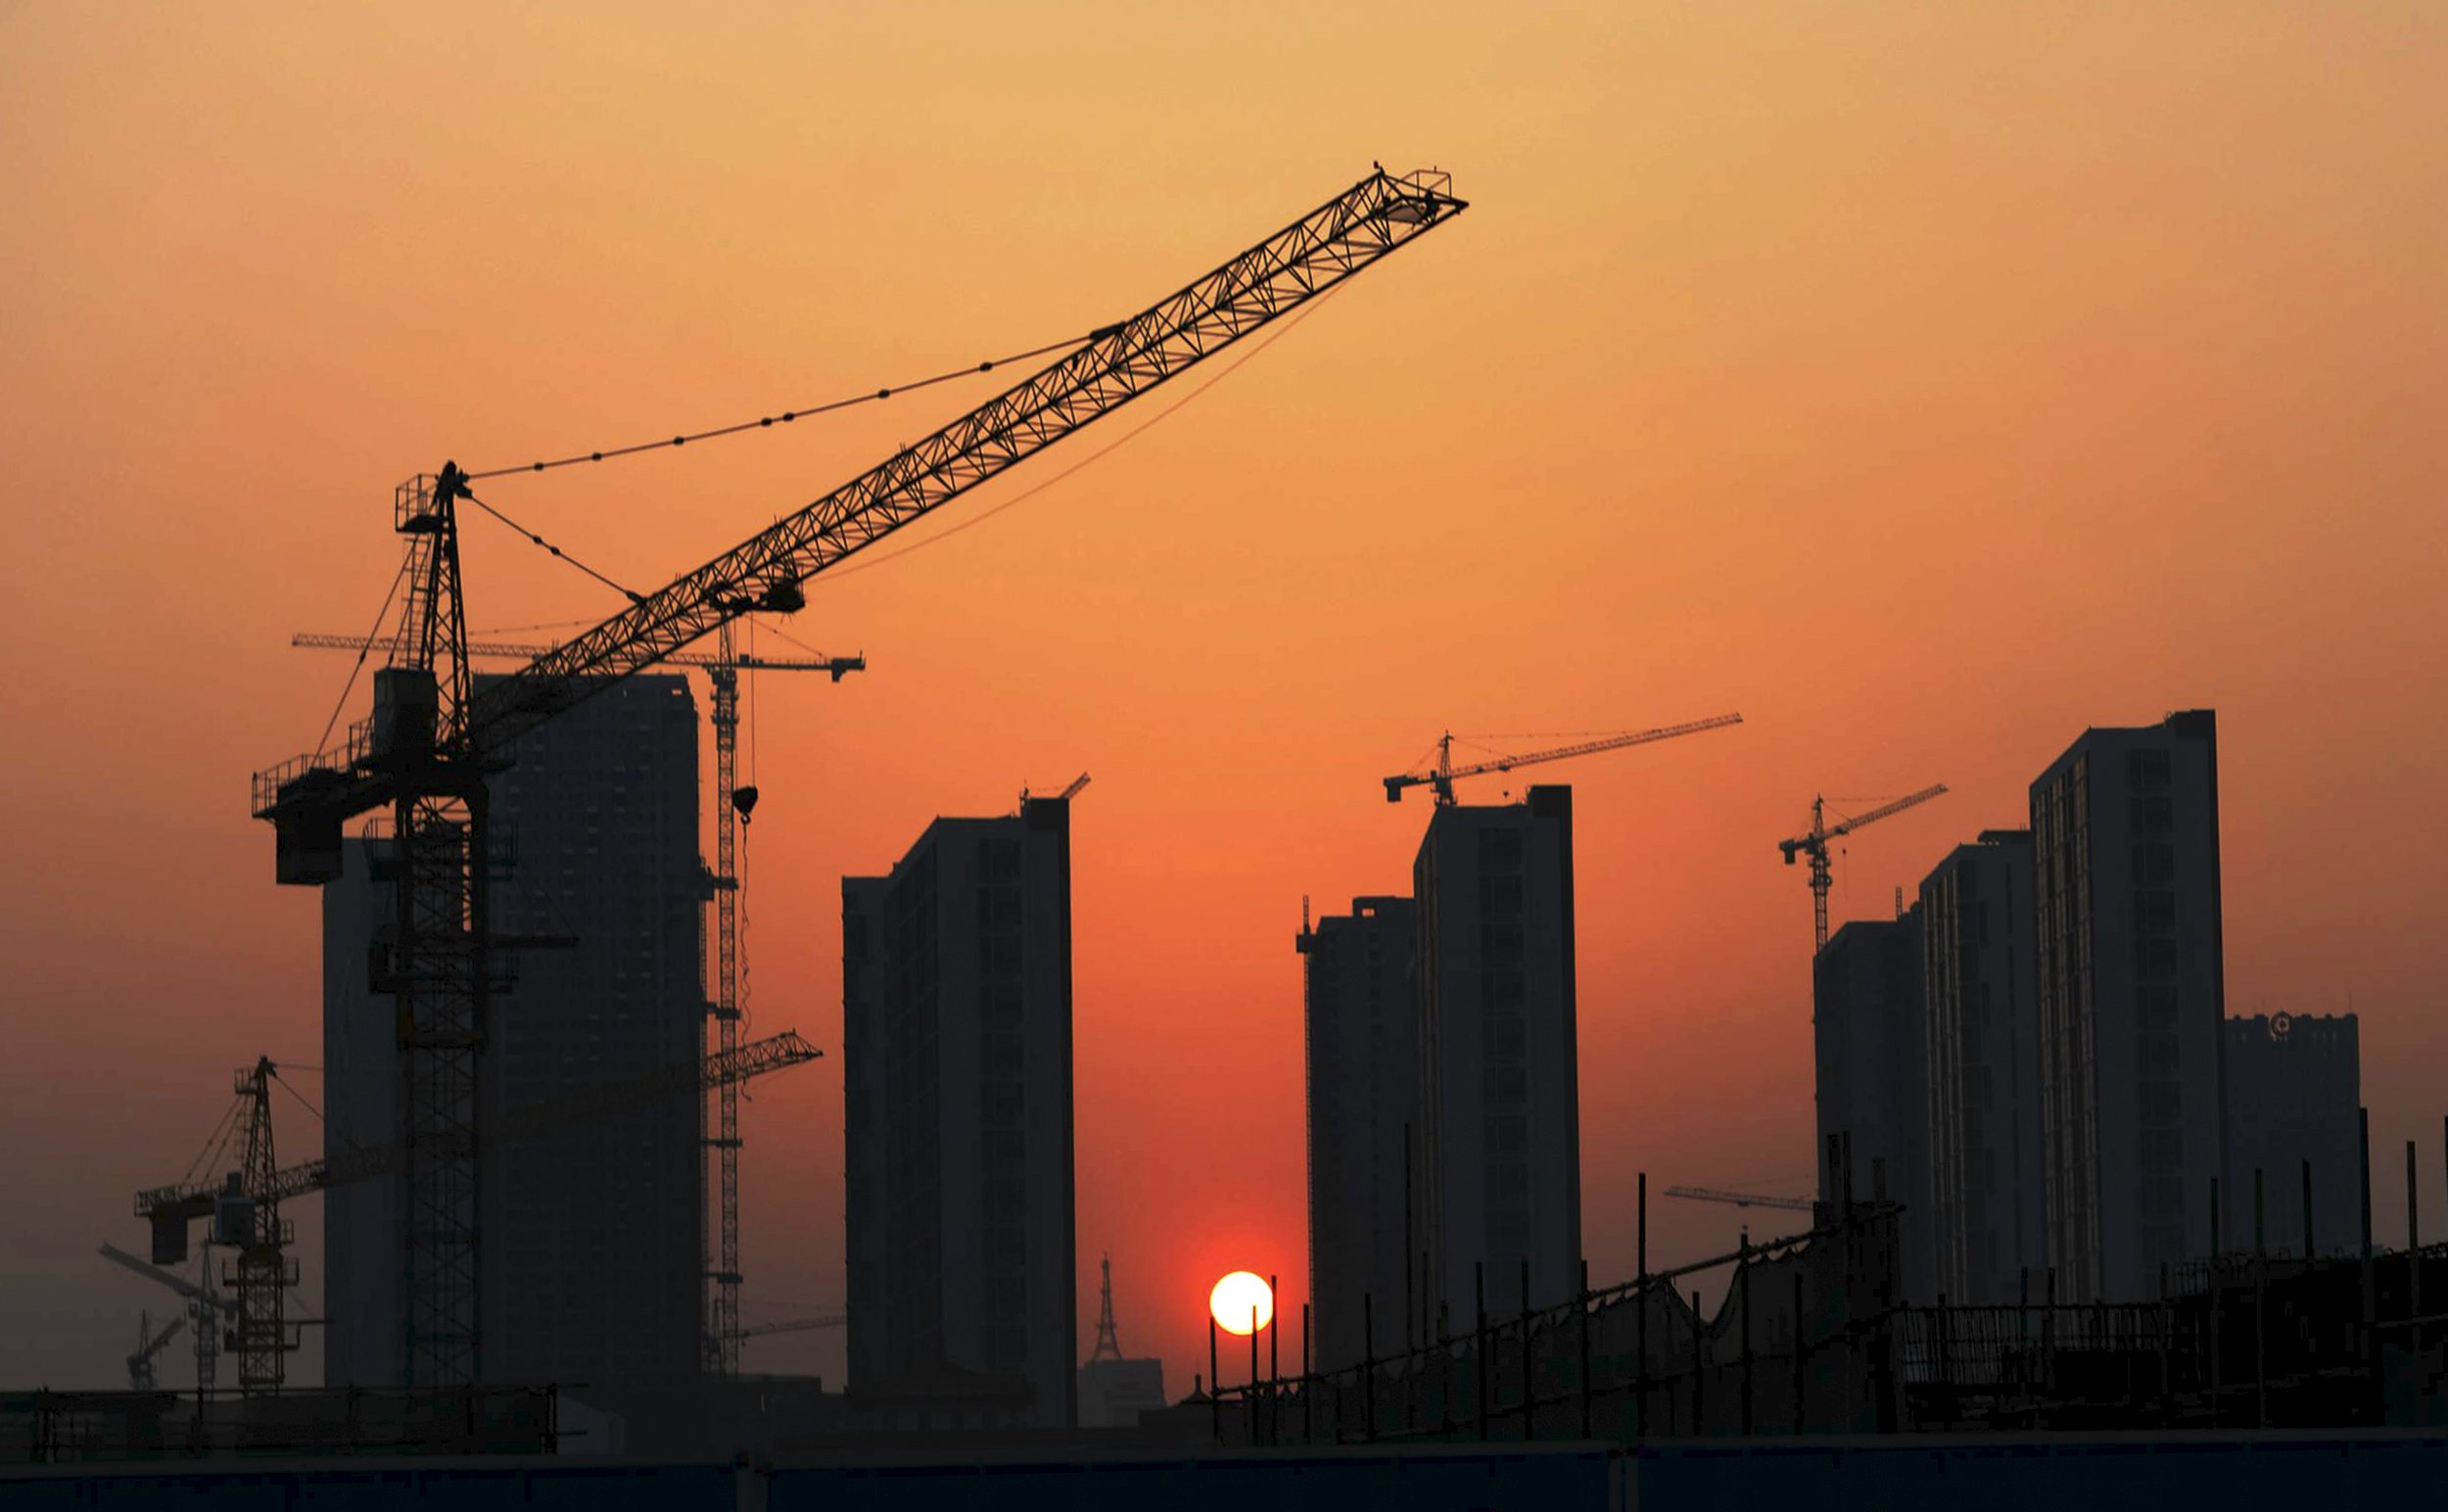 Is the sun really setting on China's economy? Photo: Reuters